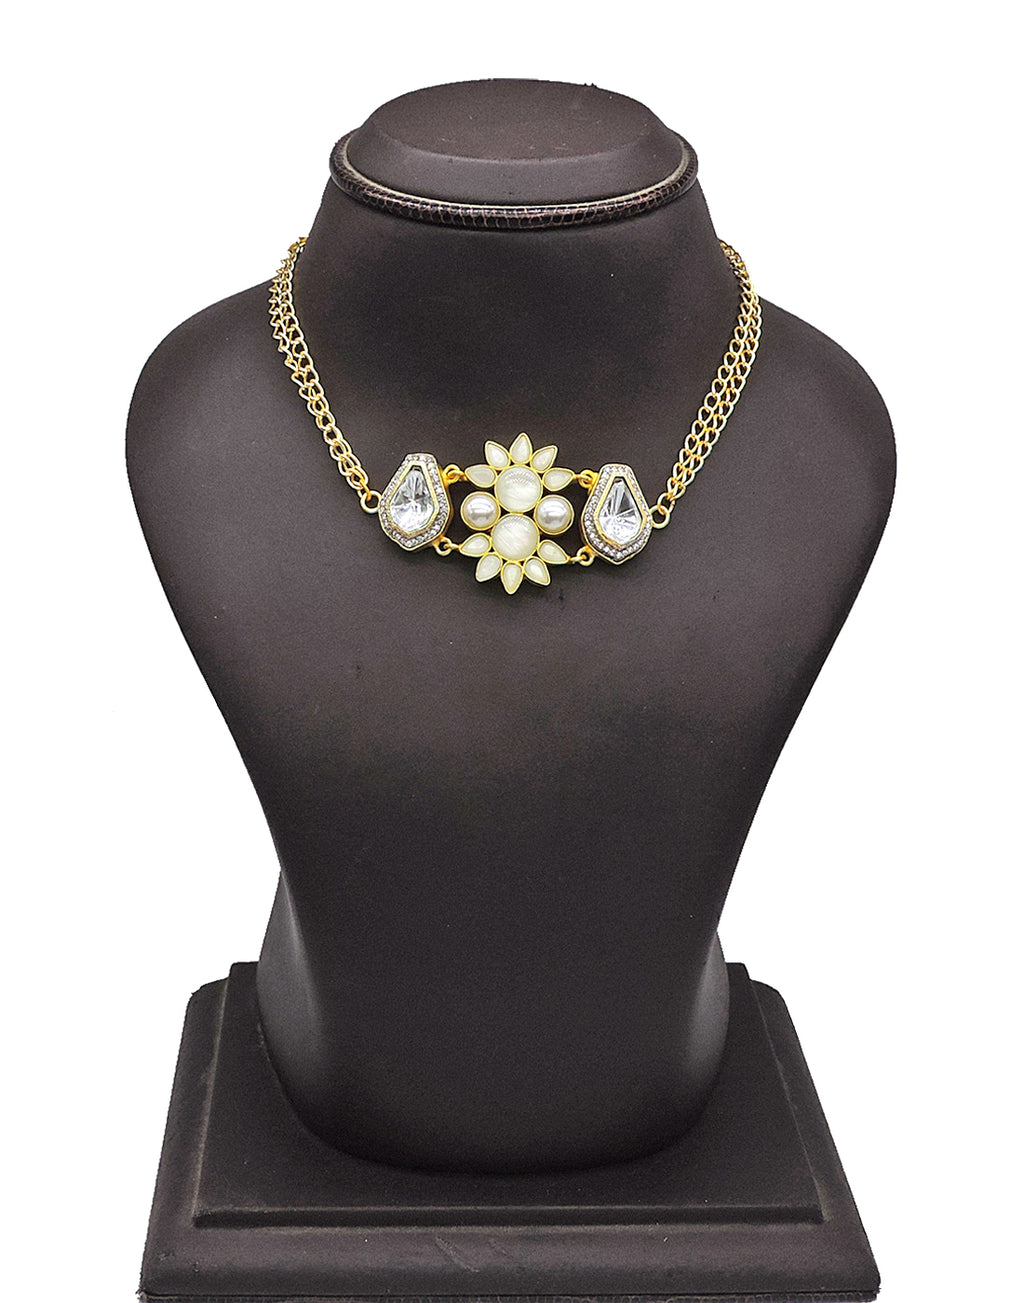 Double Flower Necklace - Statement Necklaces - Gold-Plated & Hypoallergenic Jewellery - Made in India - Dubai Jewellery - Dori